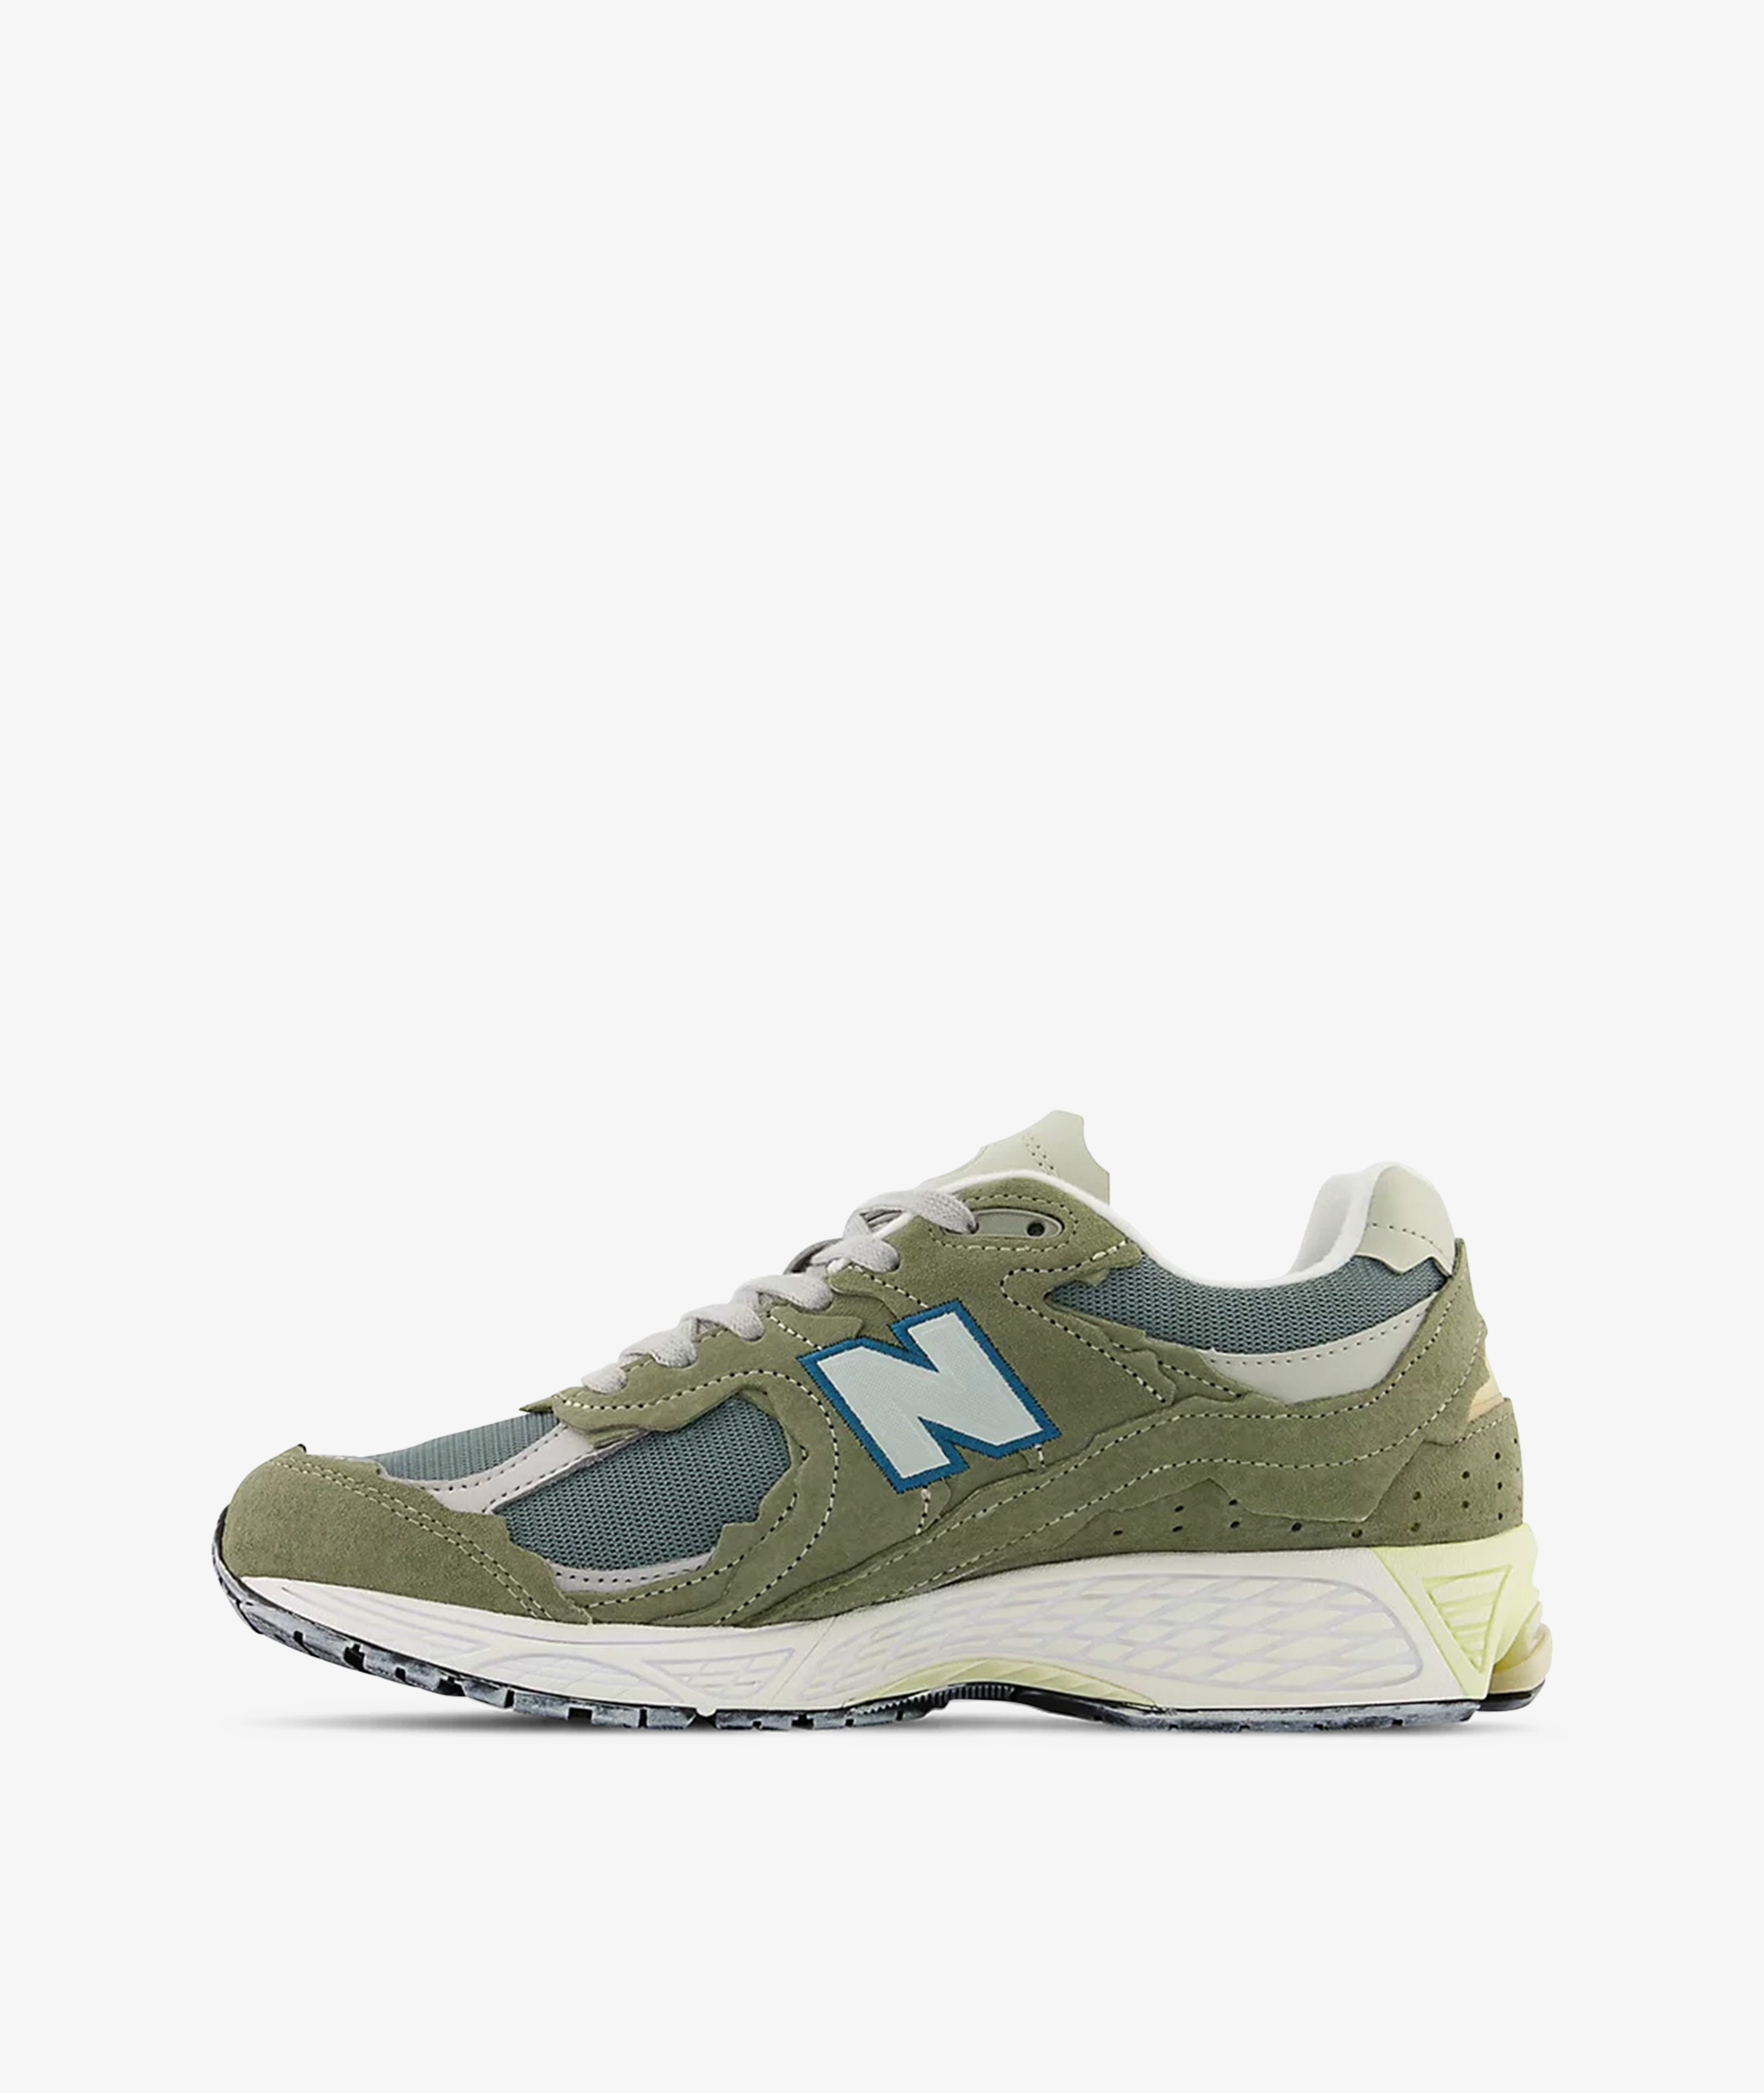 Norse Store | Shipping Worldwide - New Balance M2002RDD - Mirage Gray /  Trooper